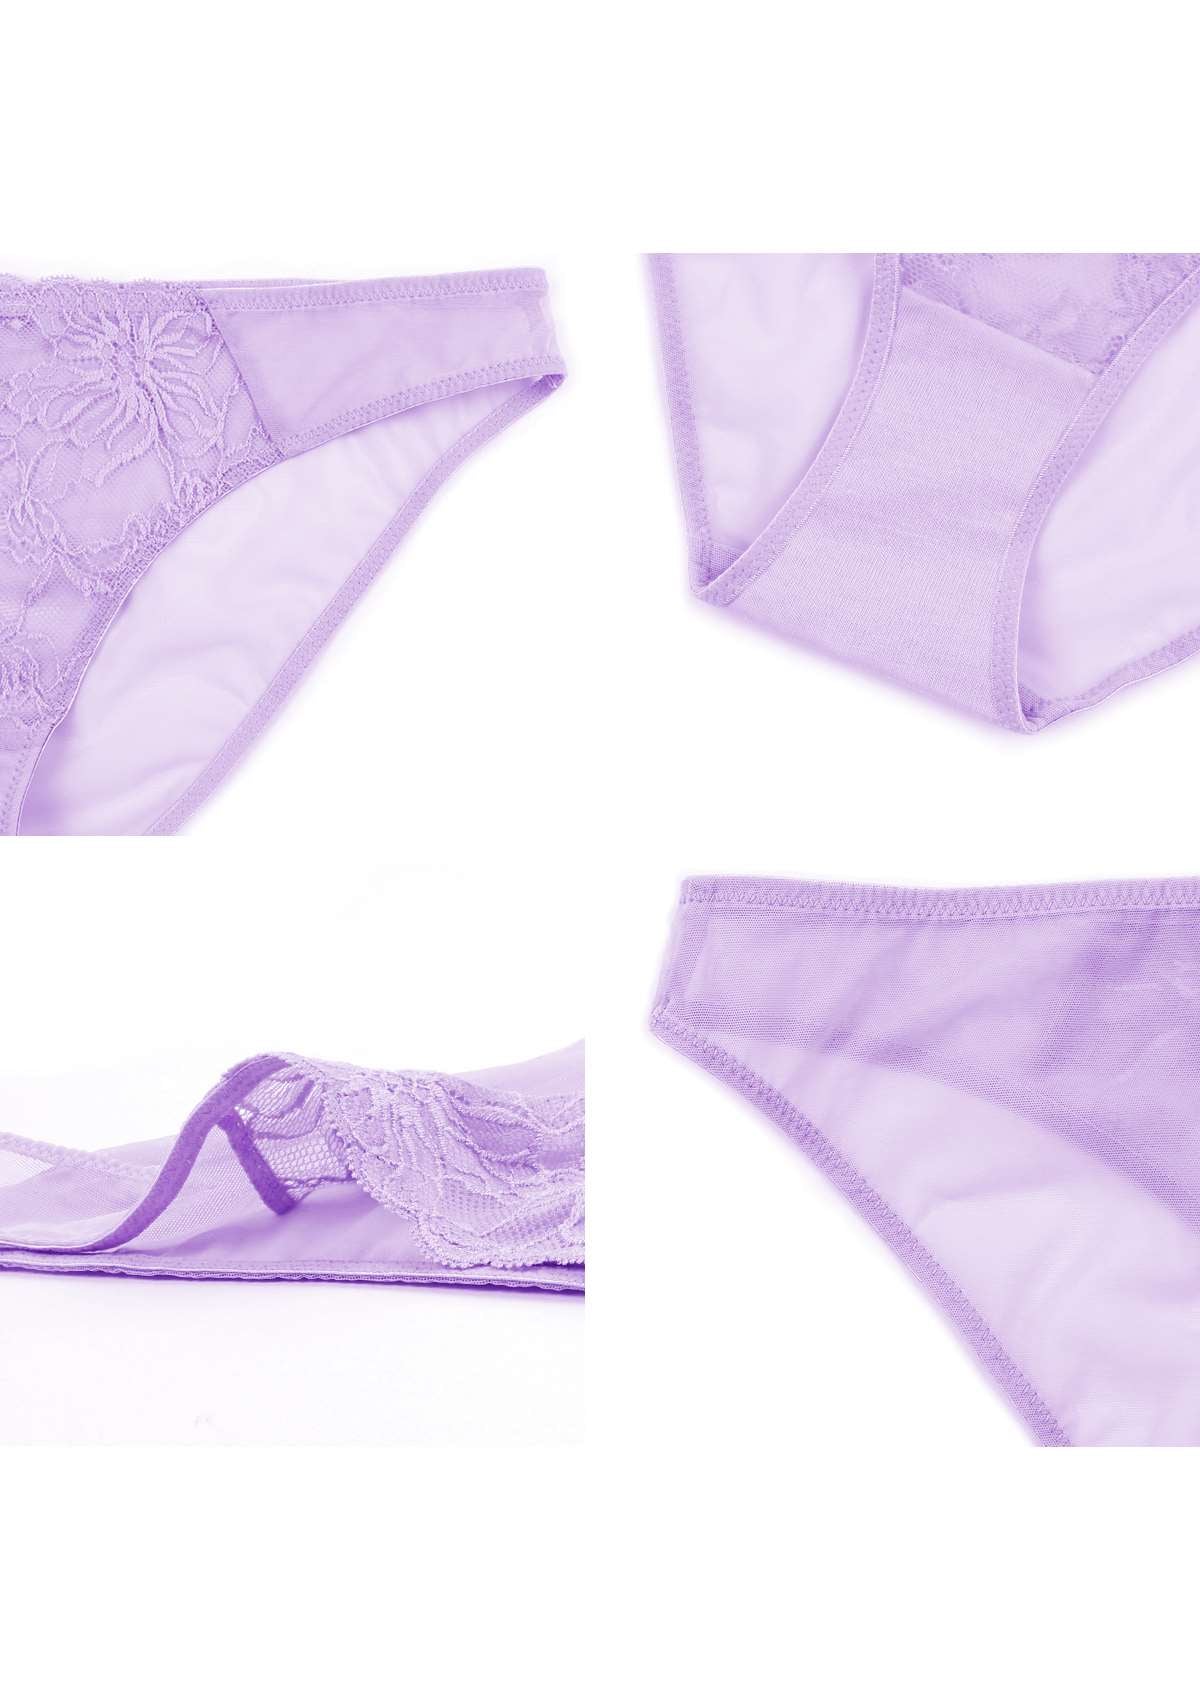 HSIA Mid-Rise Delicate Lace Sheer Underwear, Breathable And Comfortable - S / Purple